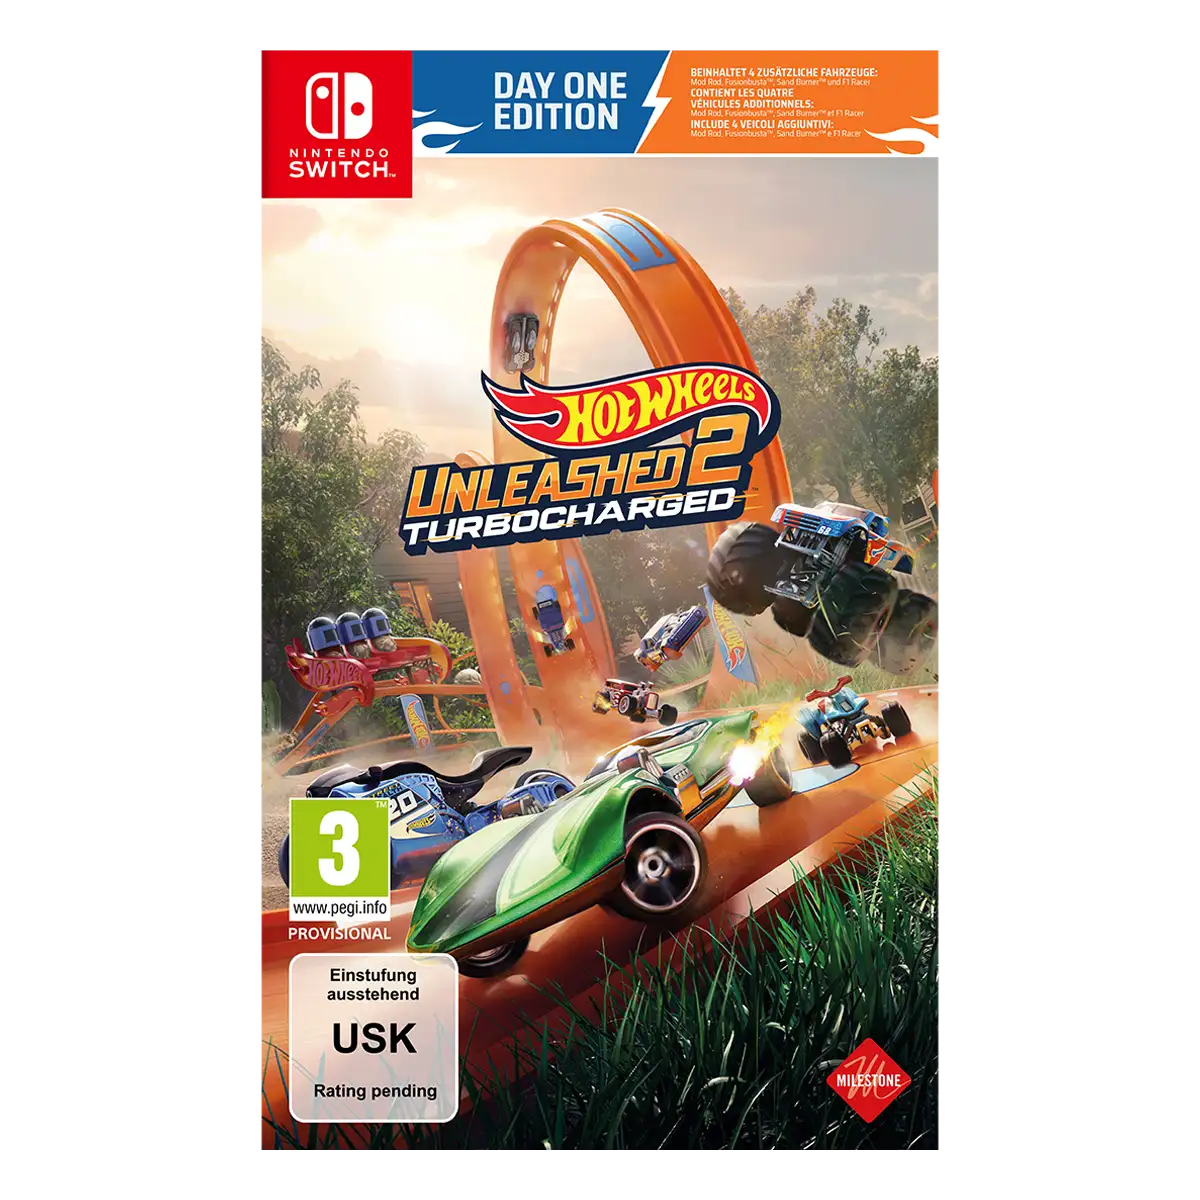 Hot Wheels Unleashed 2 Turbocharged Day One Edition(Switch)